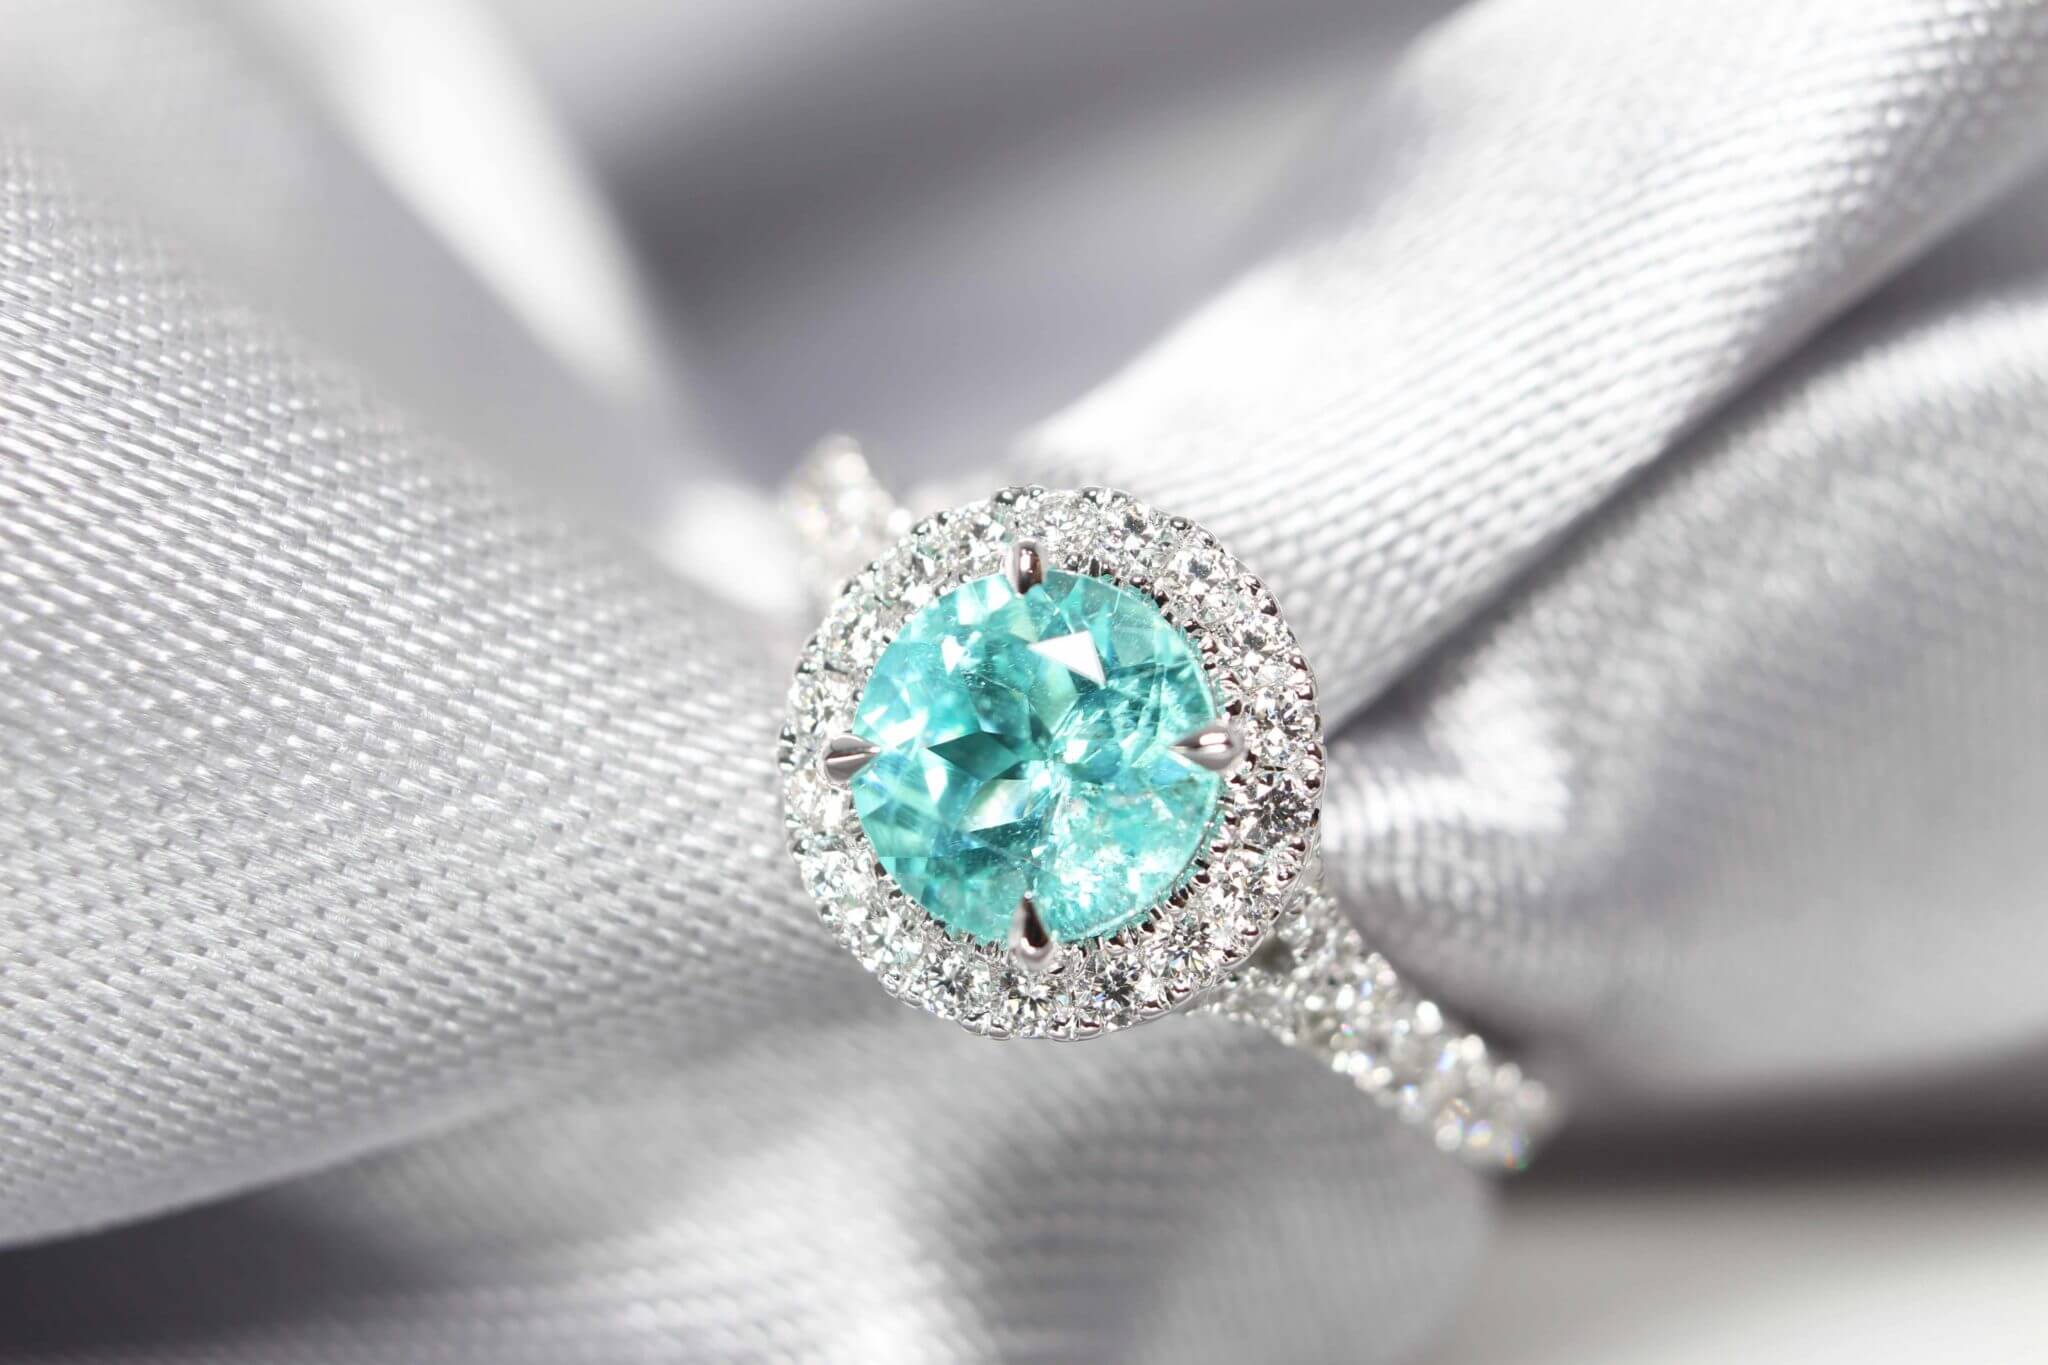 Customised electric blue or mint green Paraiba Tourmaline Proposal Ring - custom made to different classic yet stylish pieces of wedding jewellery | Local Singapore Jeweller in customised jewellery with paraiba tourmaline coloured gemstone